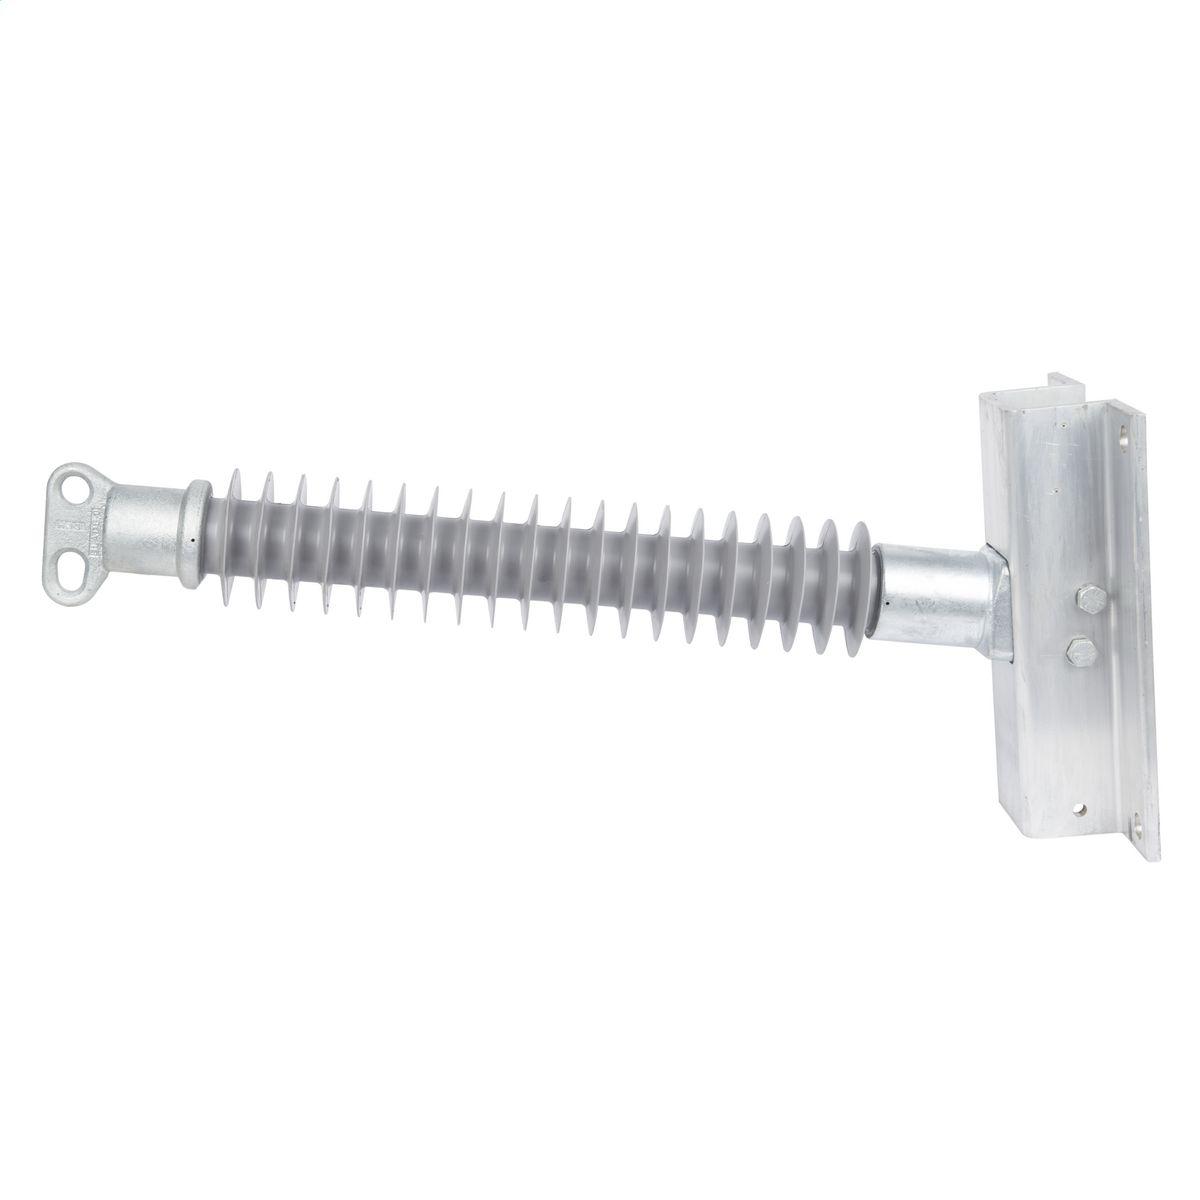 Hubbell P350137S0030 3.5" Line Post, 2 hole blade,Aluminum  flat base 9x13 - 7/8" bolts  ; Made from hydrophobic silicone polymer ; 